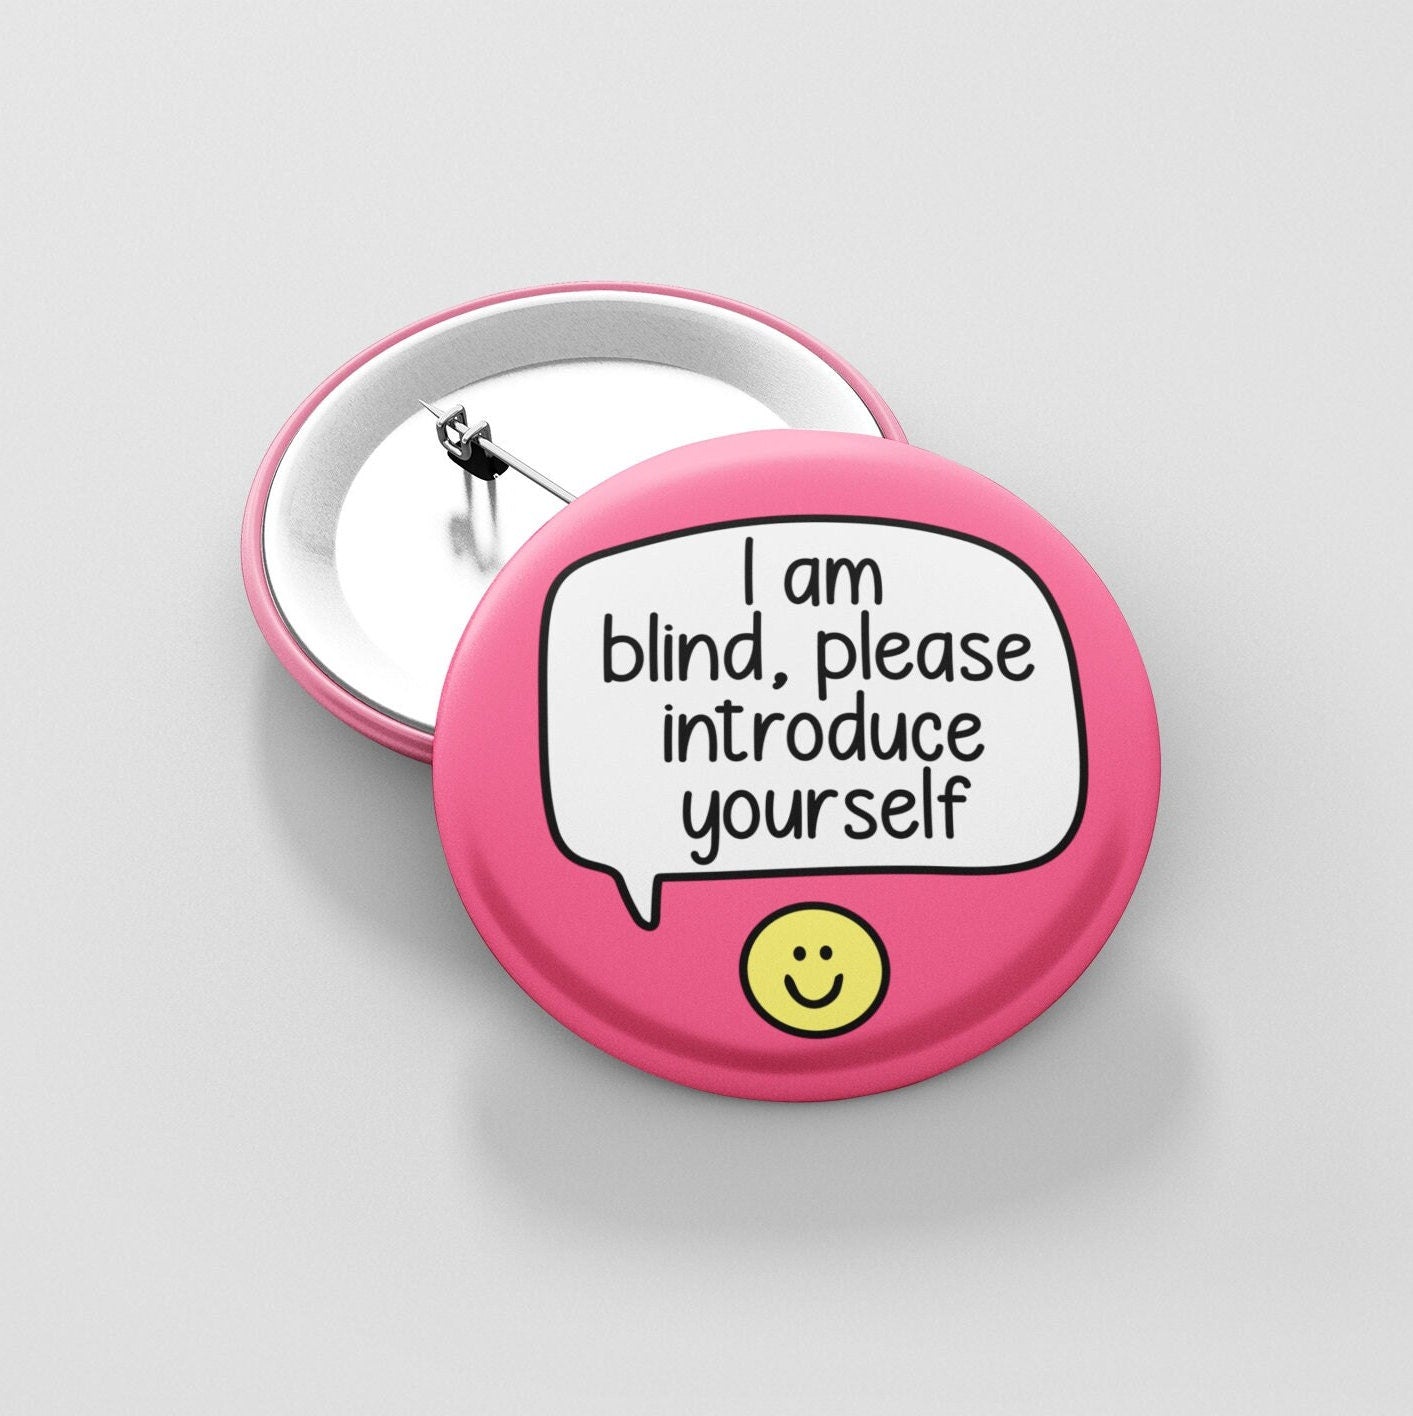 I Am Blind, Please Introduce Yourself - Badge Pin | Blindness Pins, Blind Awareness